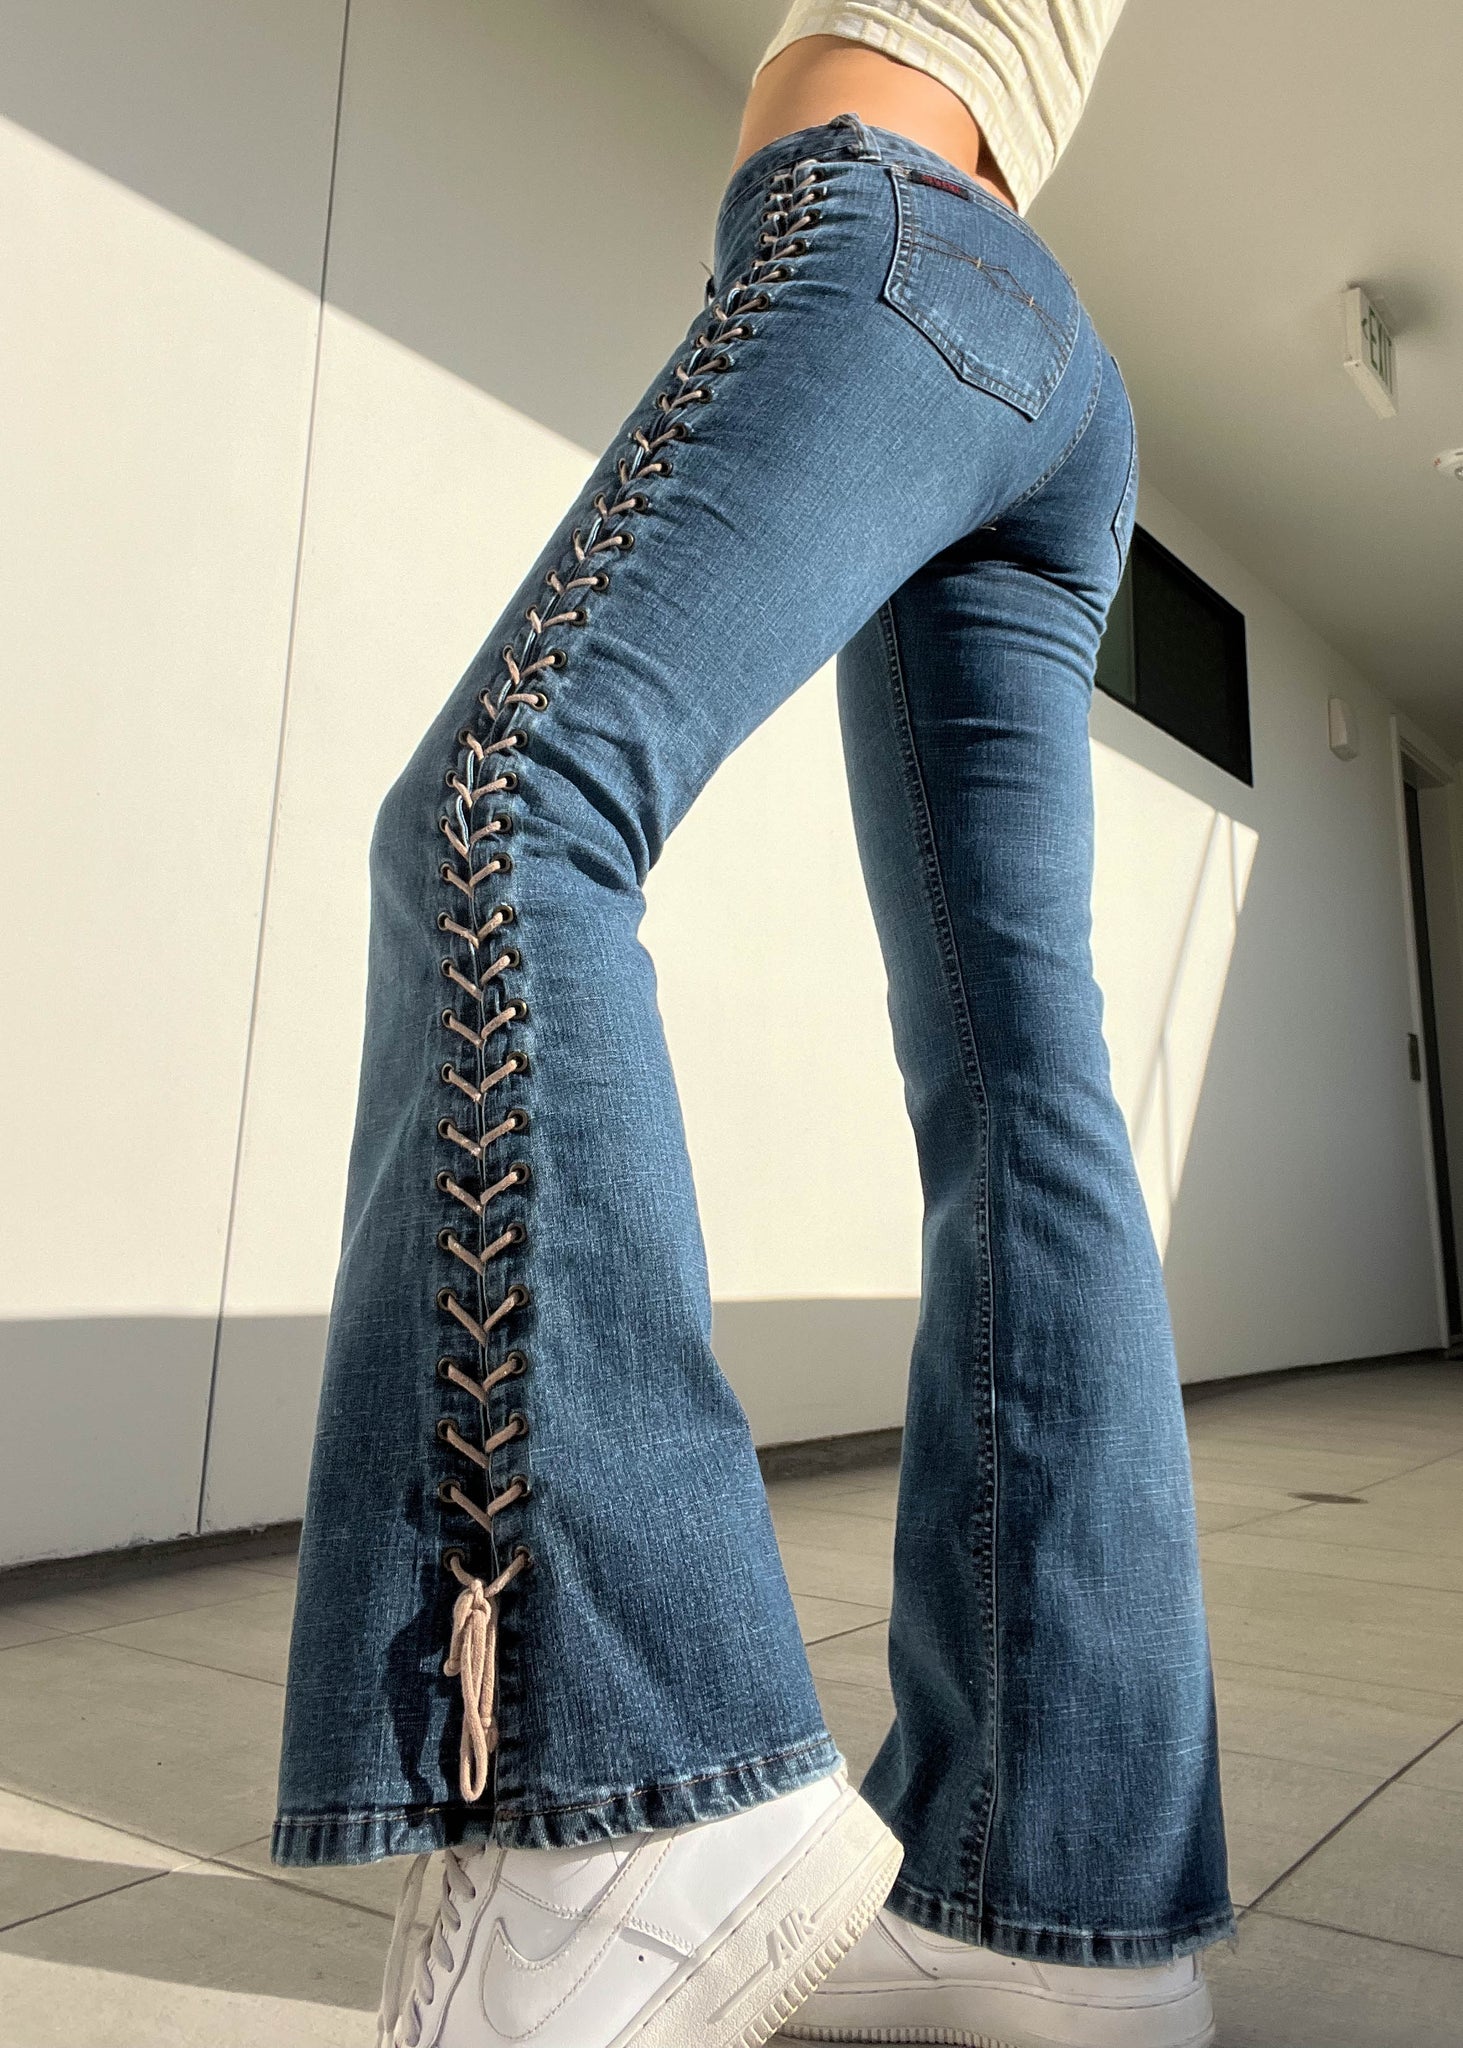 Y2k Mudd Lace Up Jeans